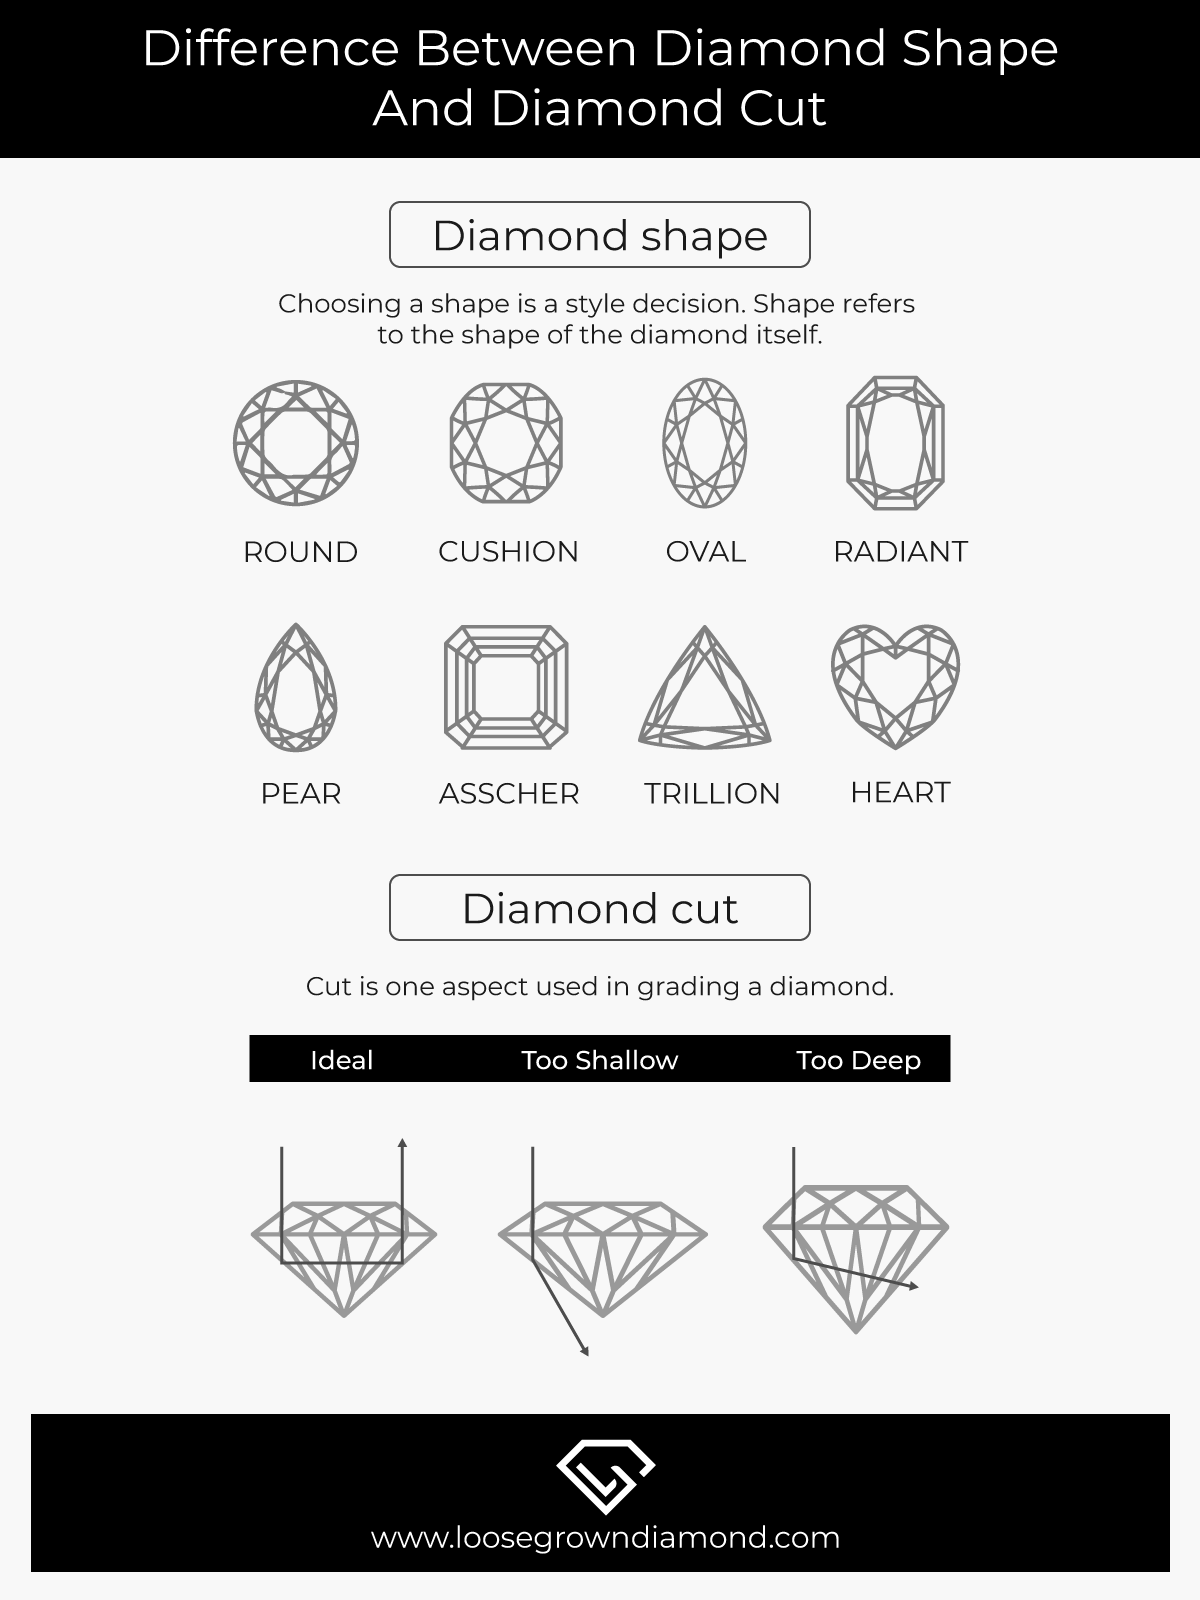 What is the difference between a diamond cut and a diamond shape?